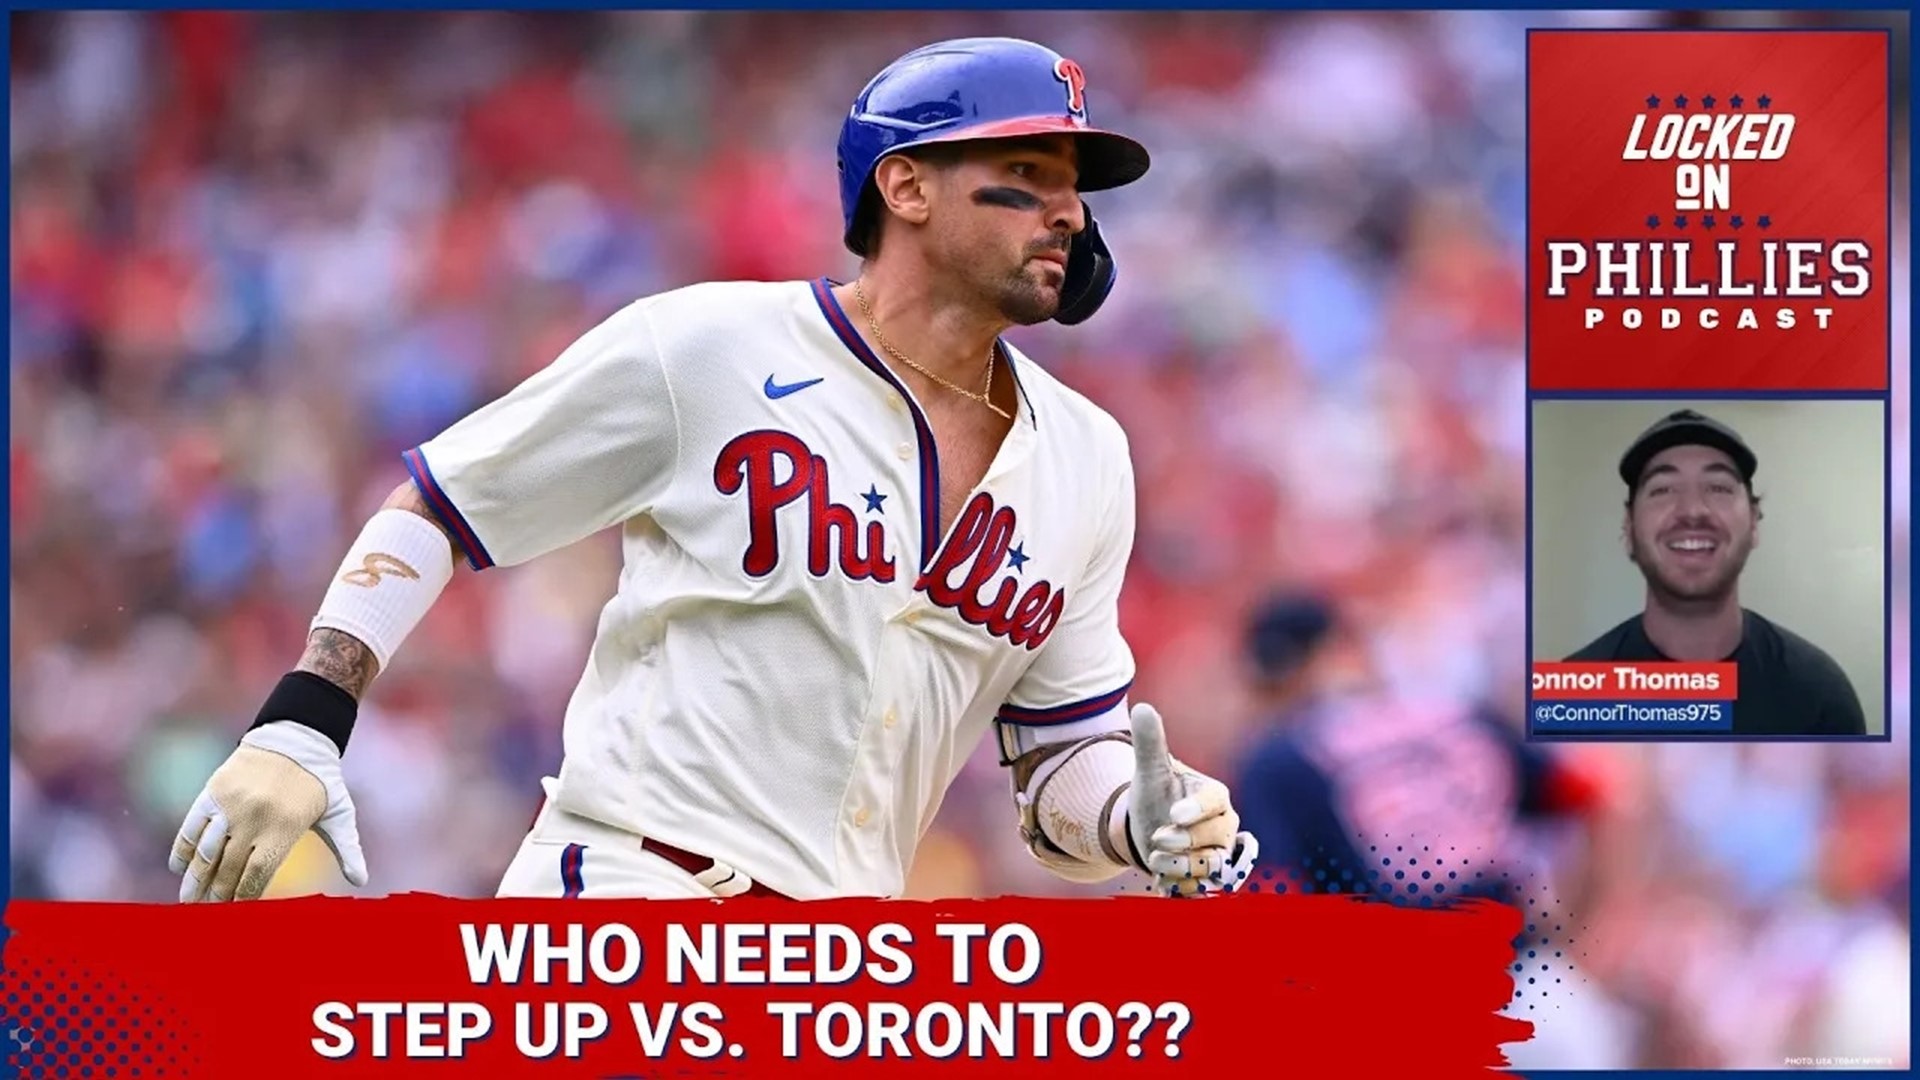 In today's episode, Connor previews the upcoming series the Philadelphia Phillies have with the Toronto Blue Jays at Citizens Bank Park.